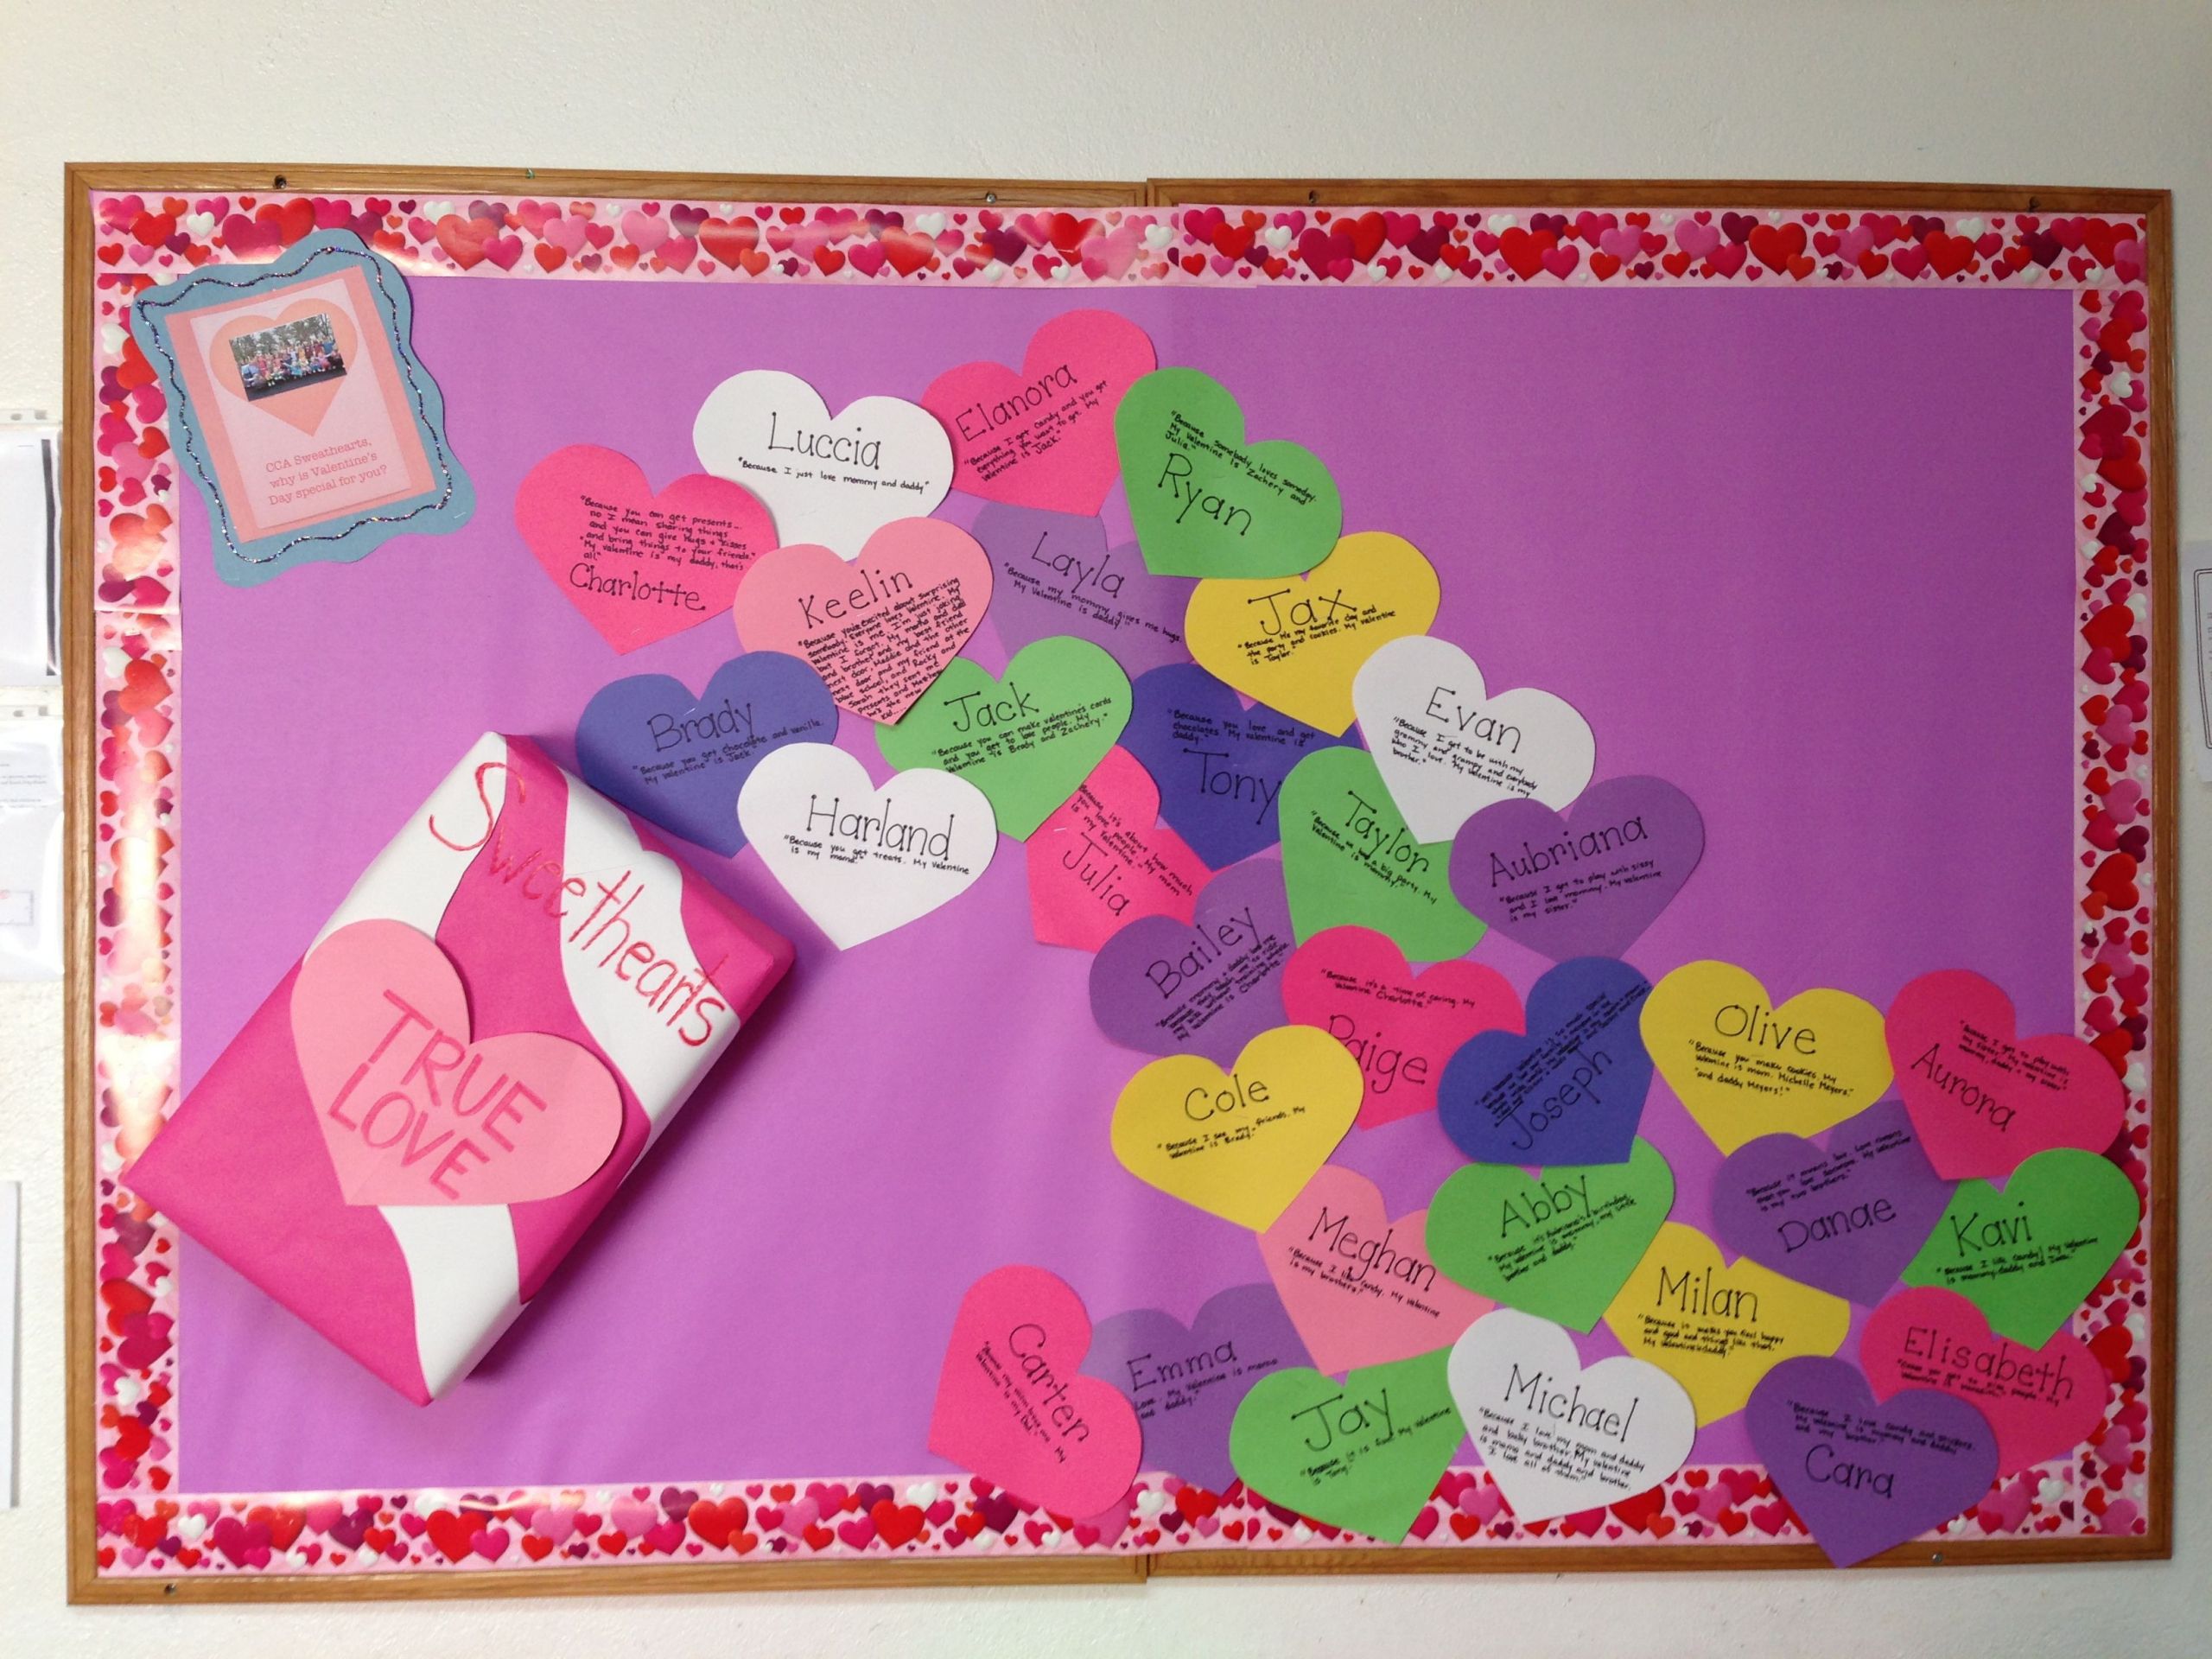 Valentines Day Bulletin Board Ideas For Preschool
 Pin on Clifton children s academy centreville